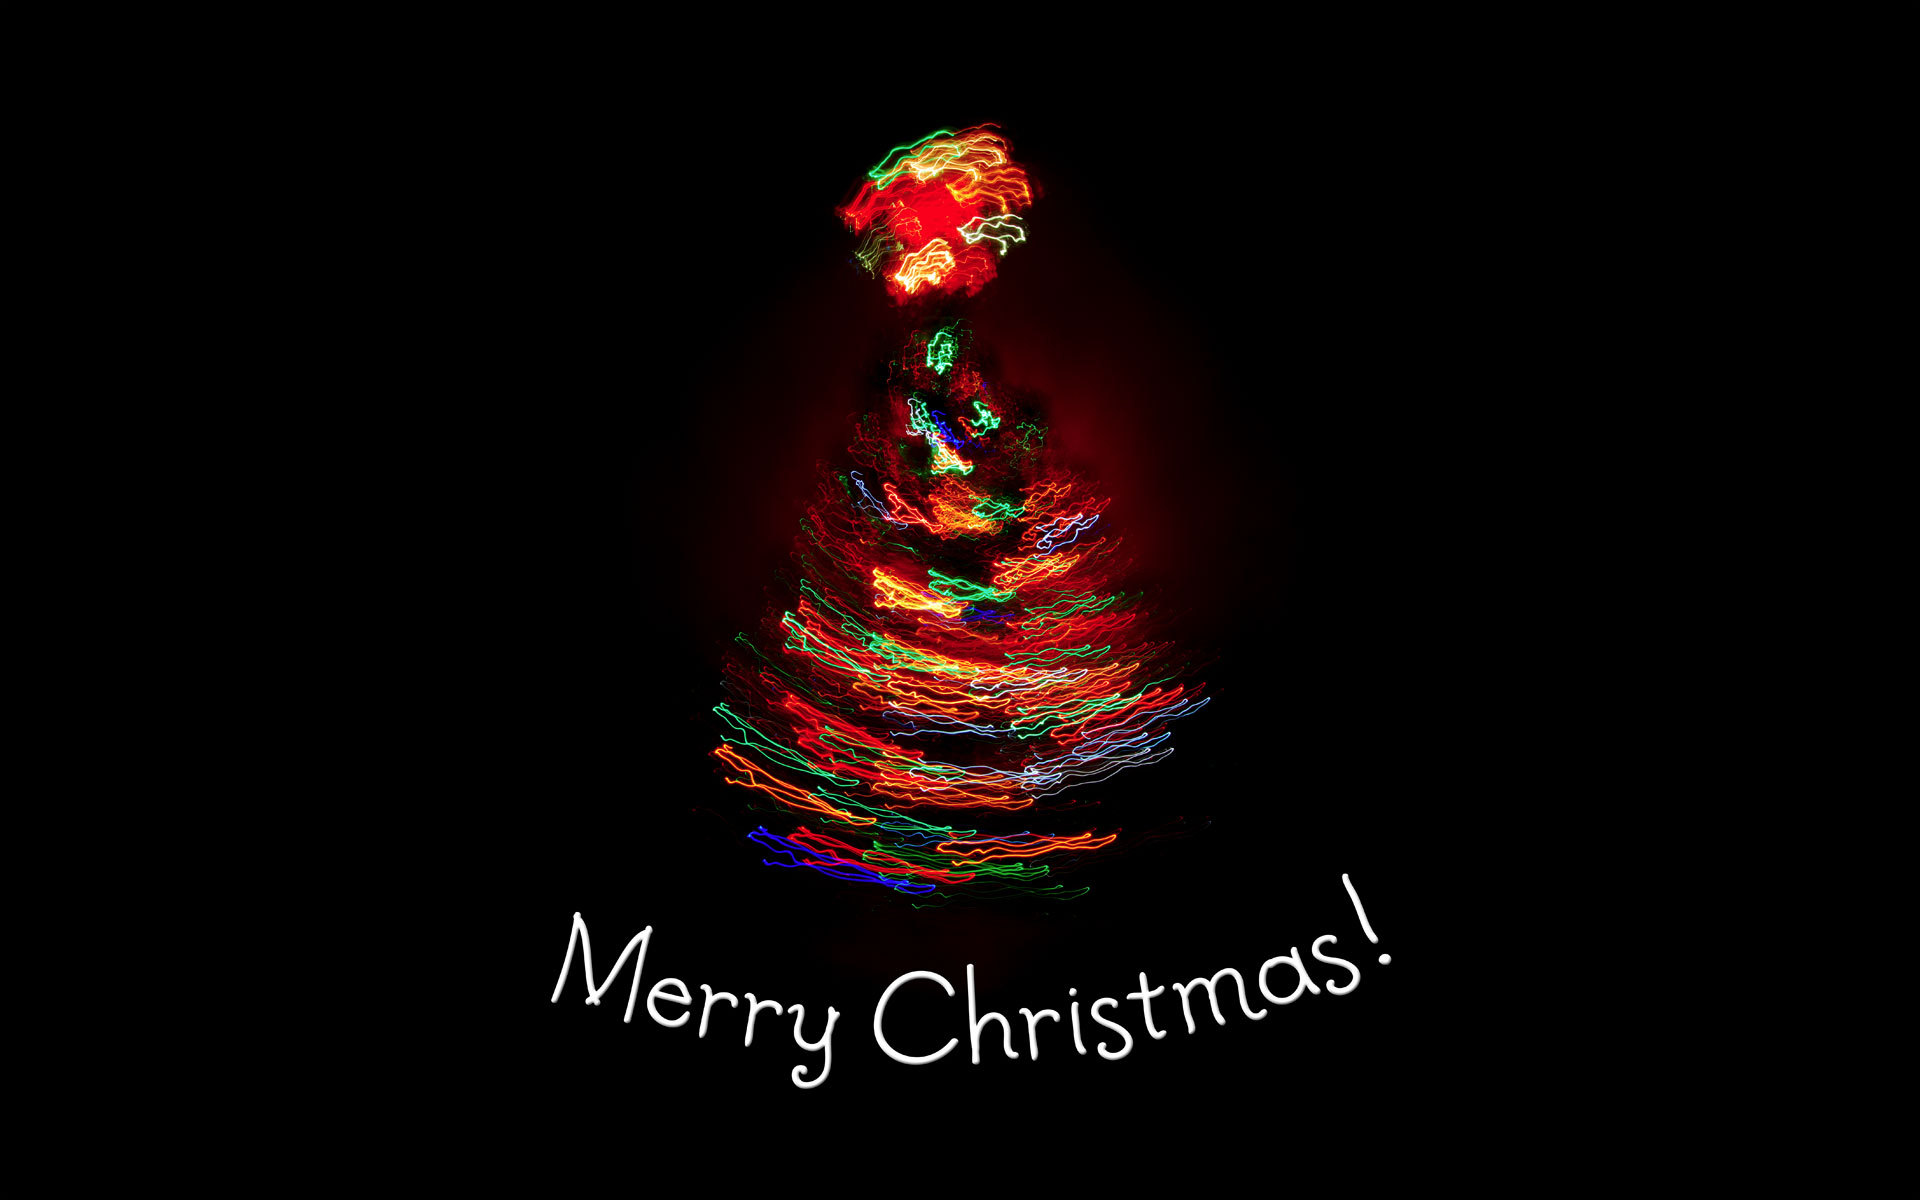 Merry Christmas Quotes - Wishes & SMS Greetings w/ Images 2016